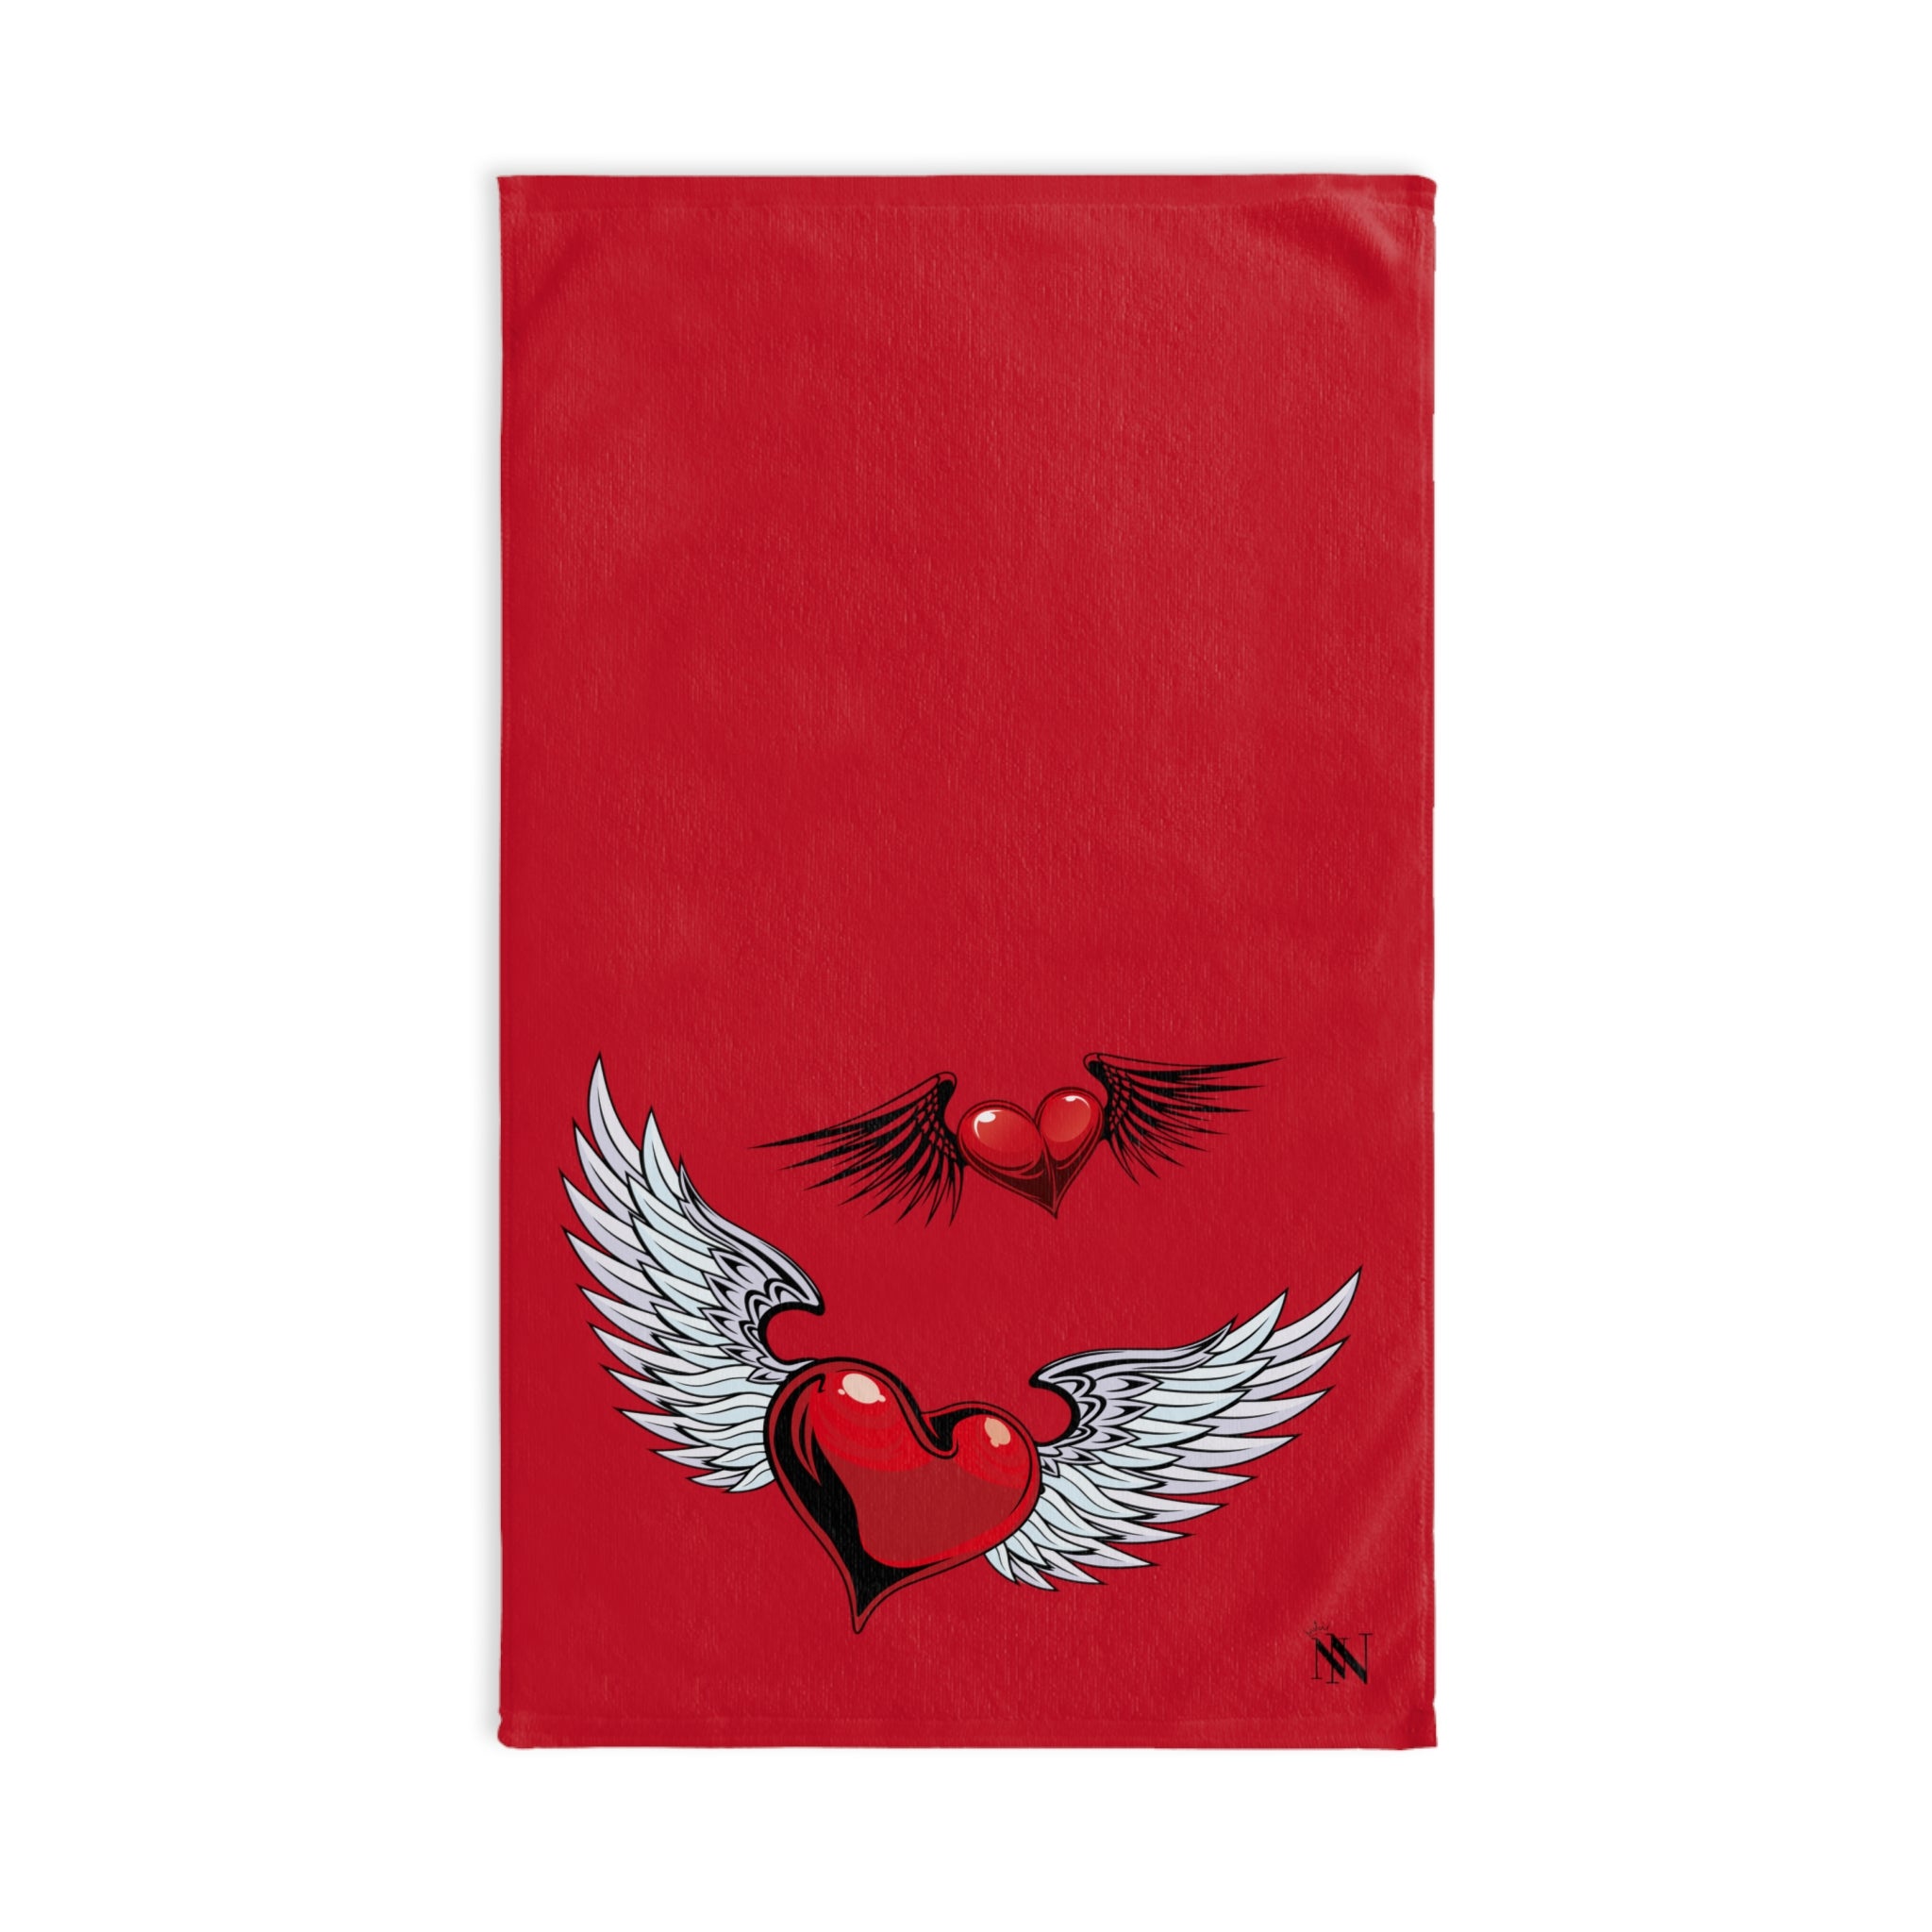 Twin Wing Heart Red | Sexy Gifts for Boyfriend, Funny Towel Romantic Gift for Wedding Couple Fiance First Year 2nd Anniversary Valentines, Party Gag Gifts, Joke Humor Cloth for Husband Men BF NECTAR NAPKINS